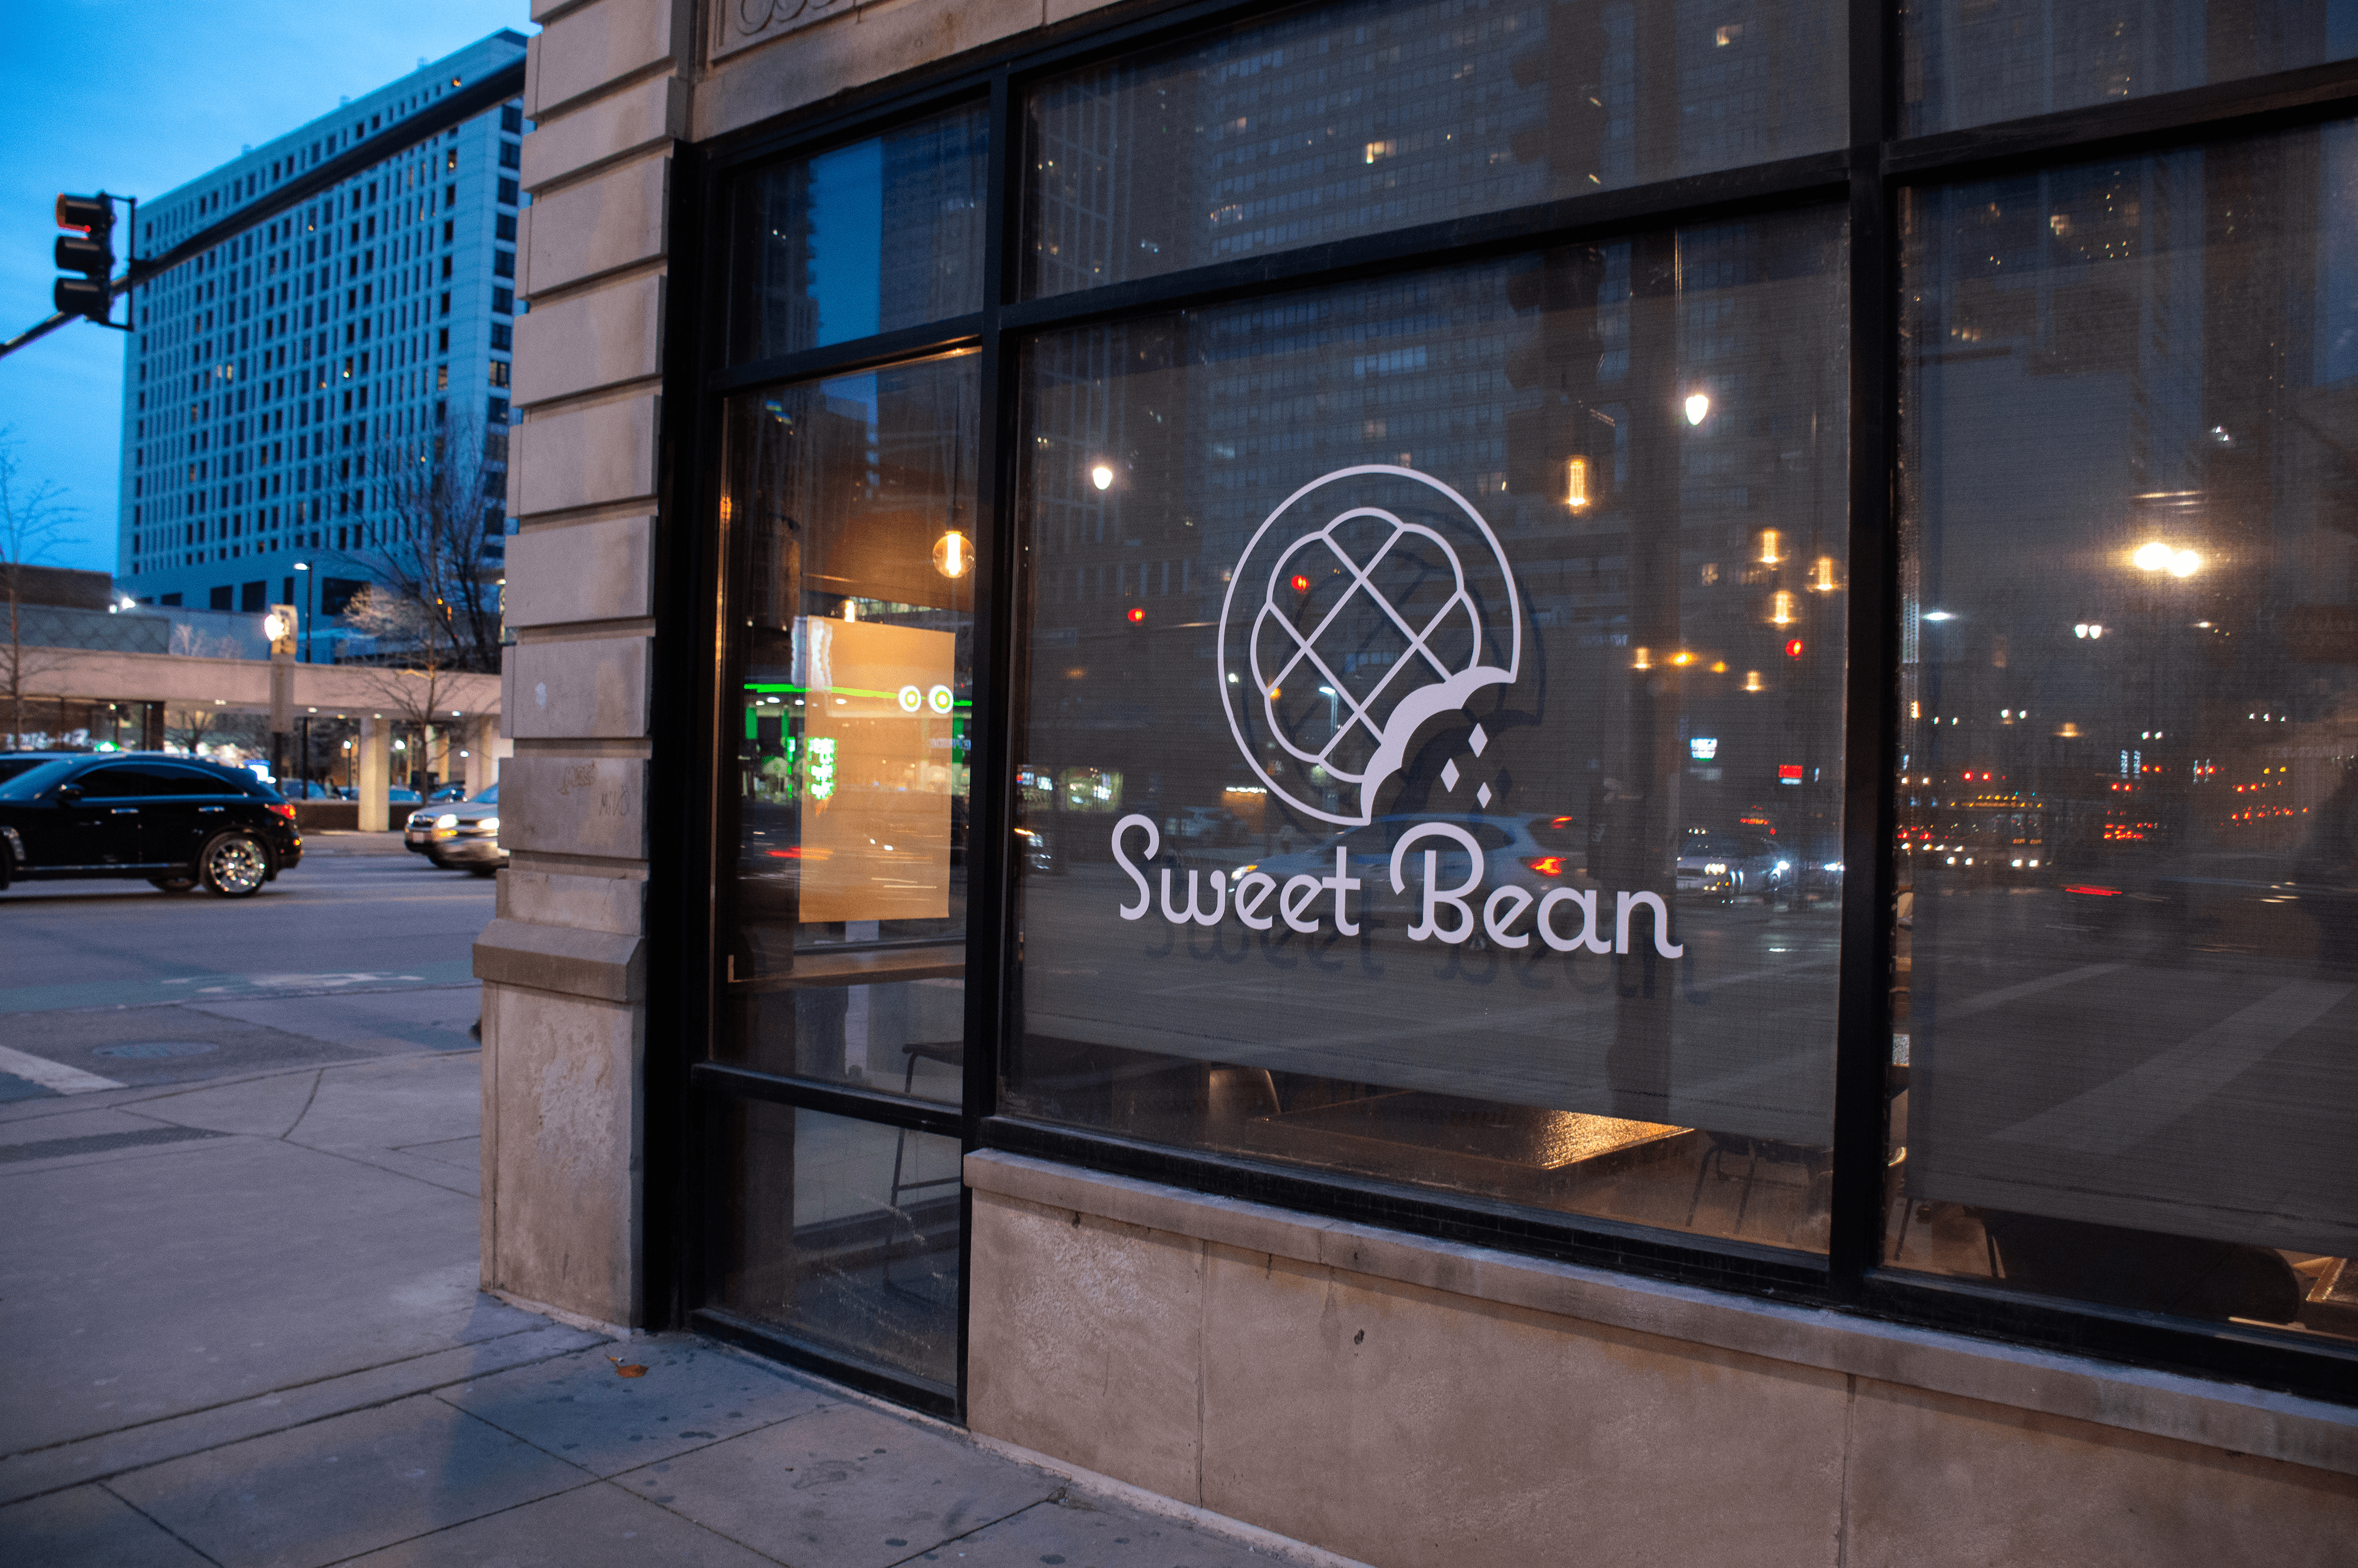 Store front with reflection of the city in the glass and “Sweet Bean” written in big letters under a graphic of a crumbled cookie.